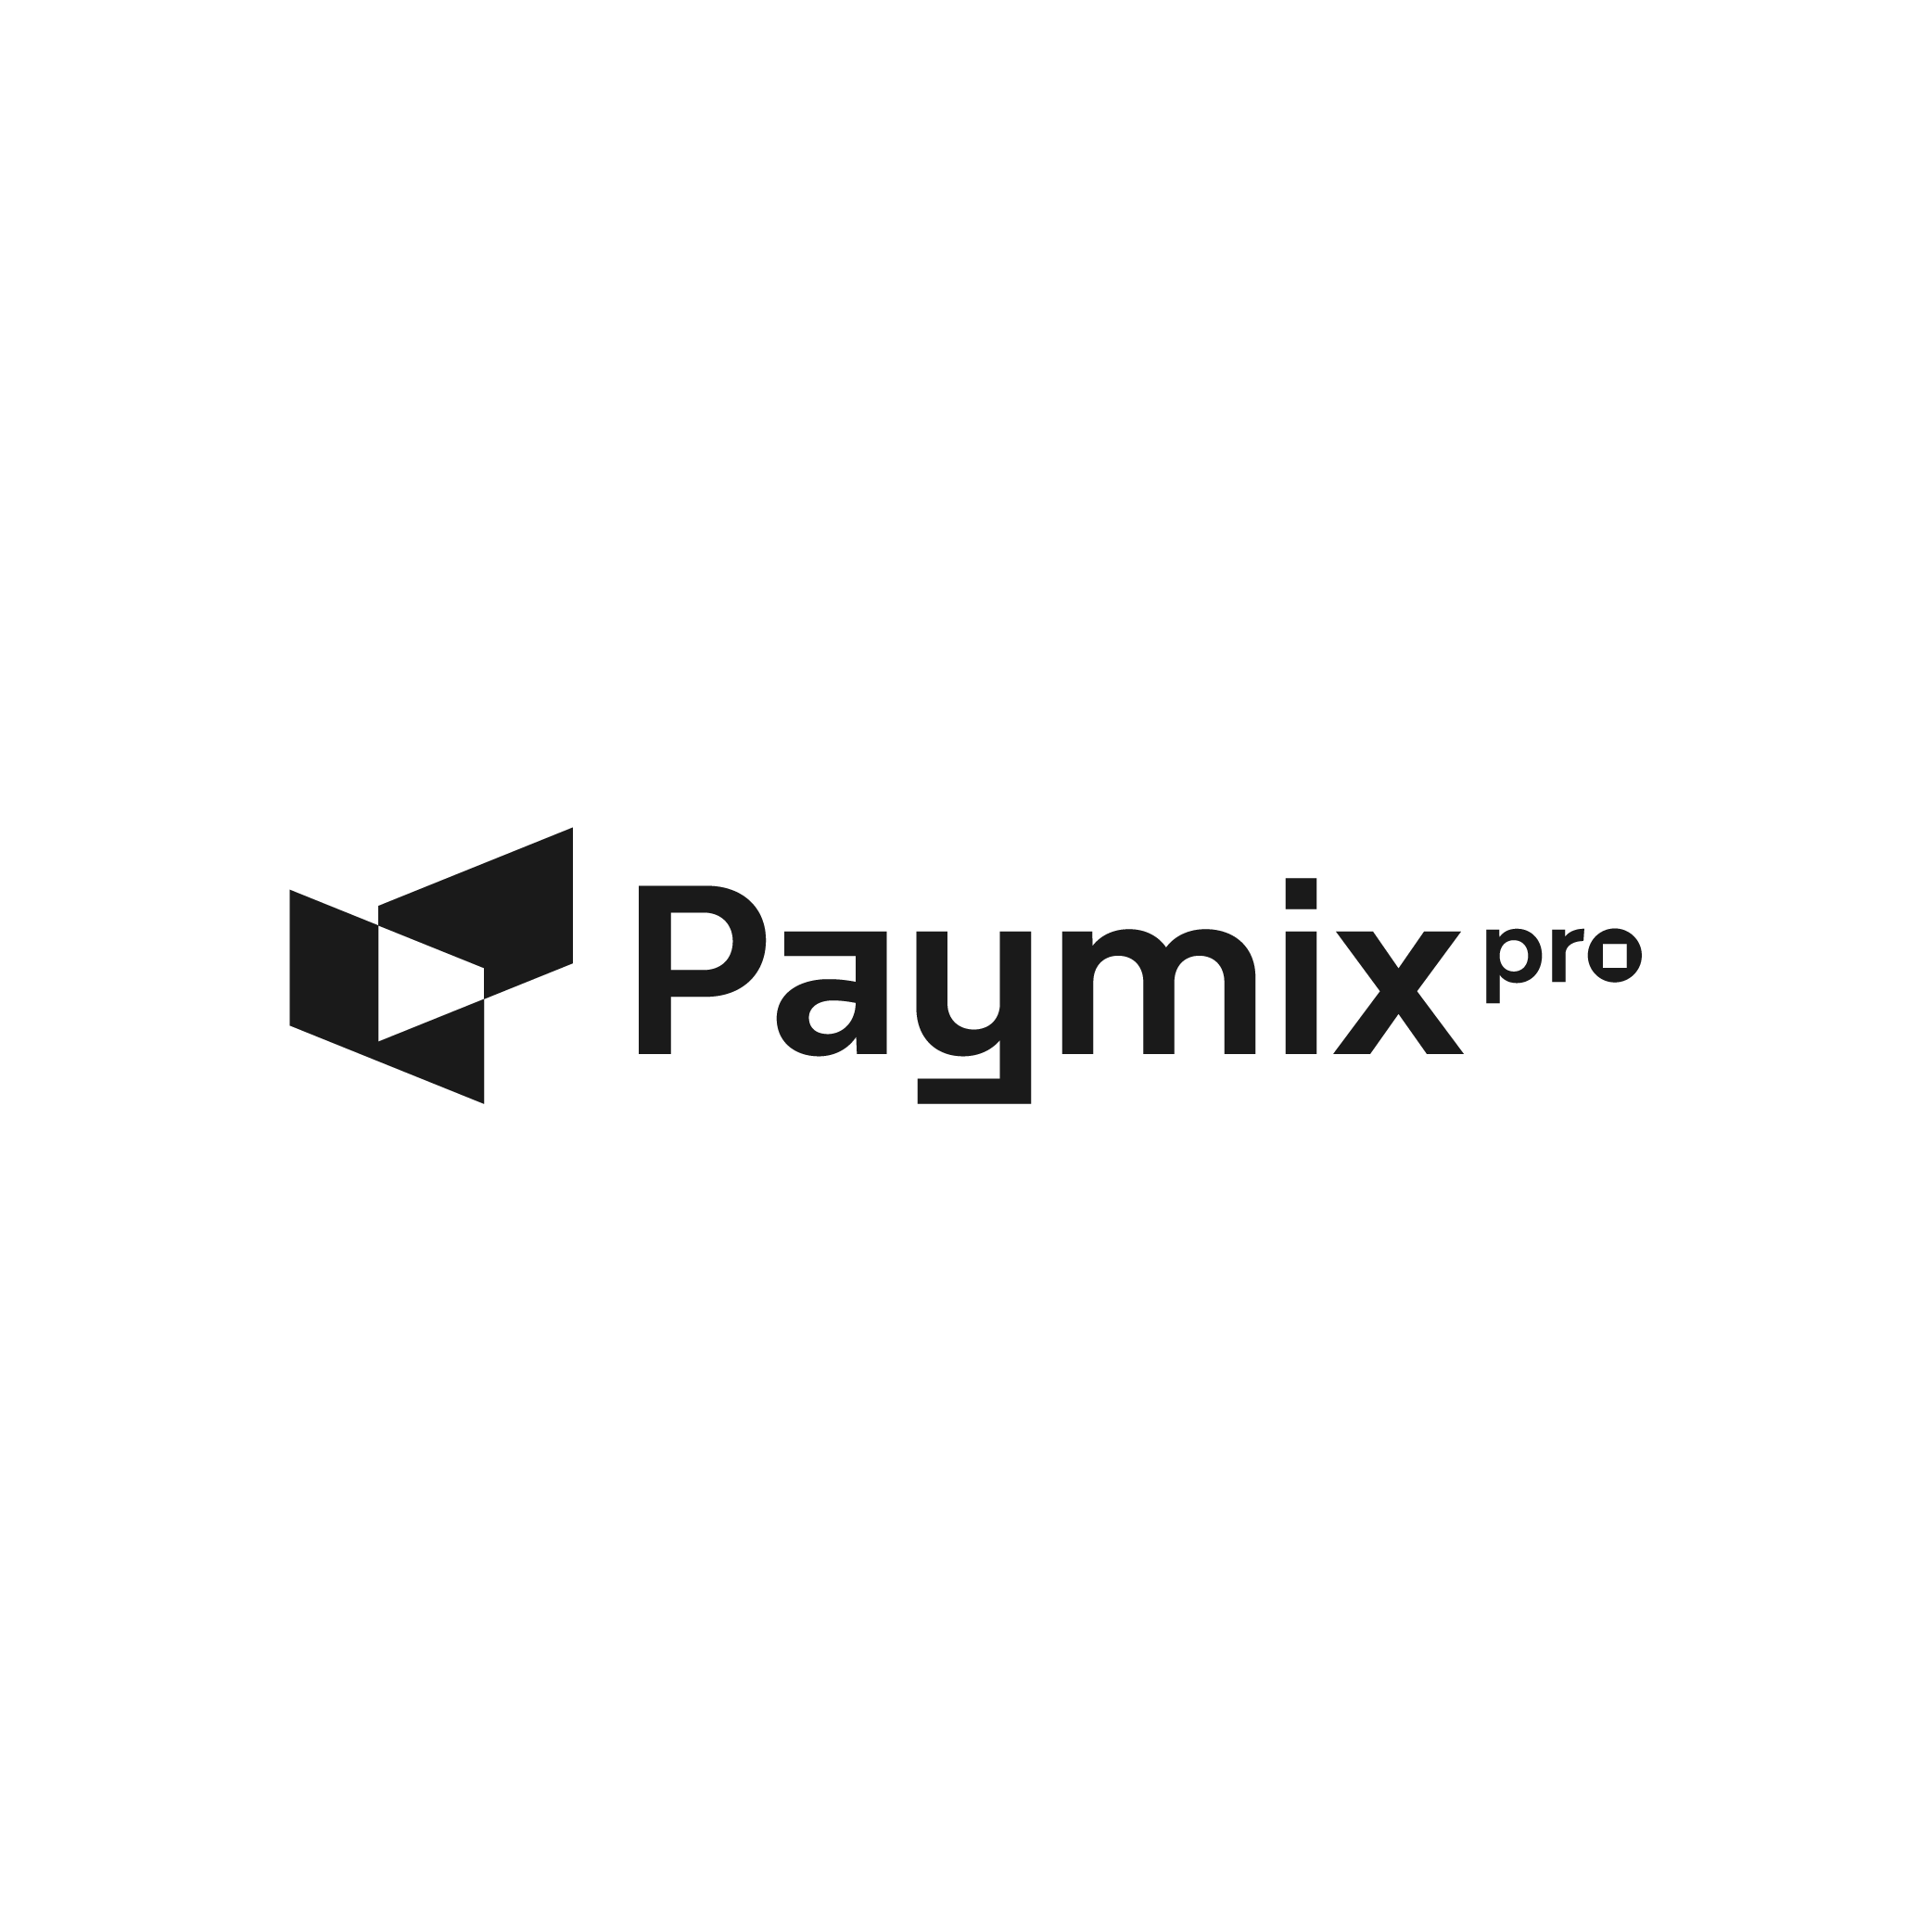 PaymixPro - Safe, Secure & Trusted